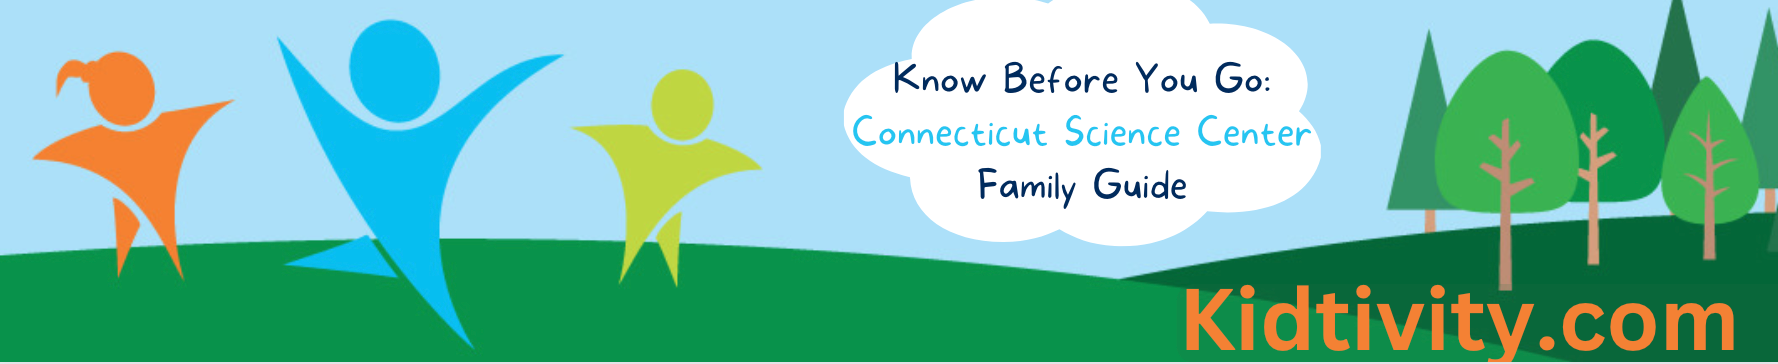 Know Before You Go- Connecticut Science Center